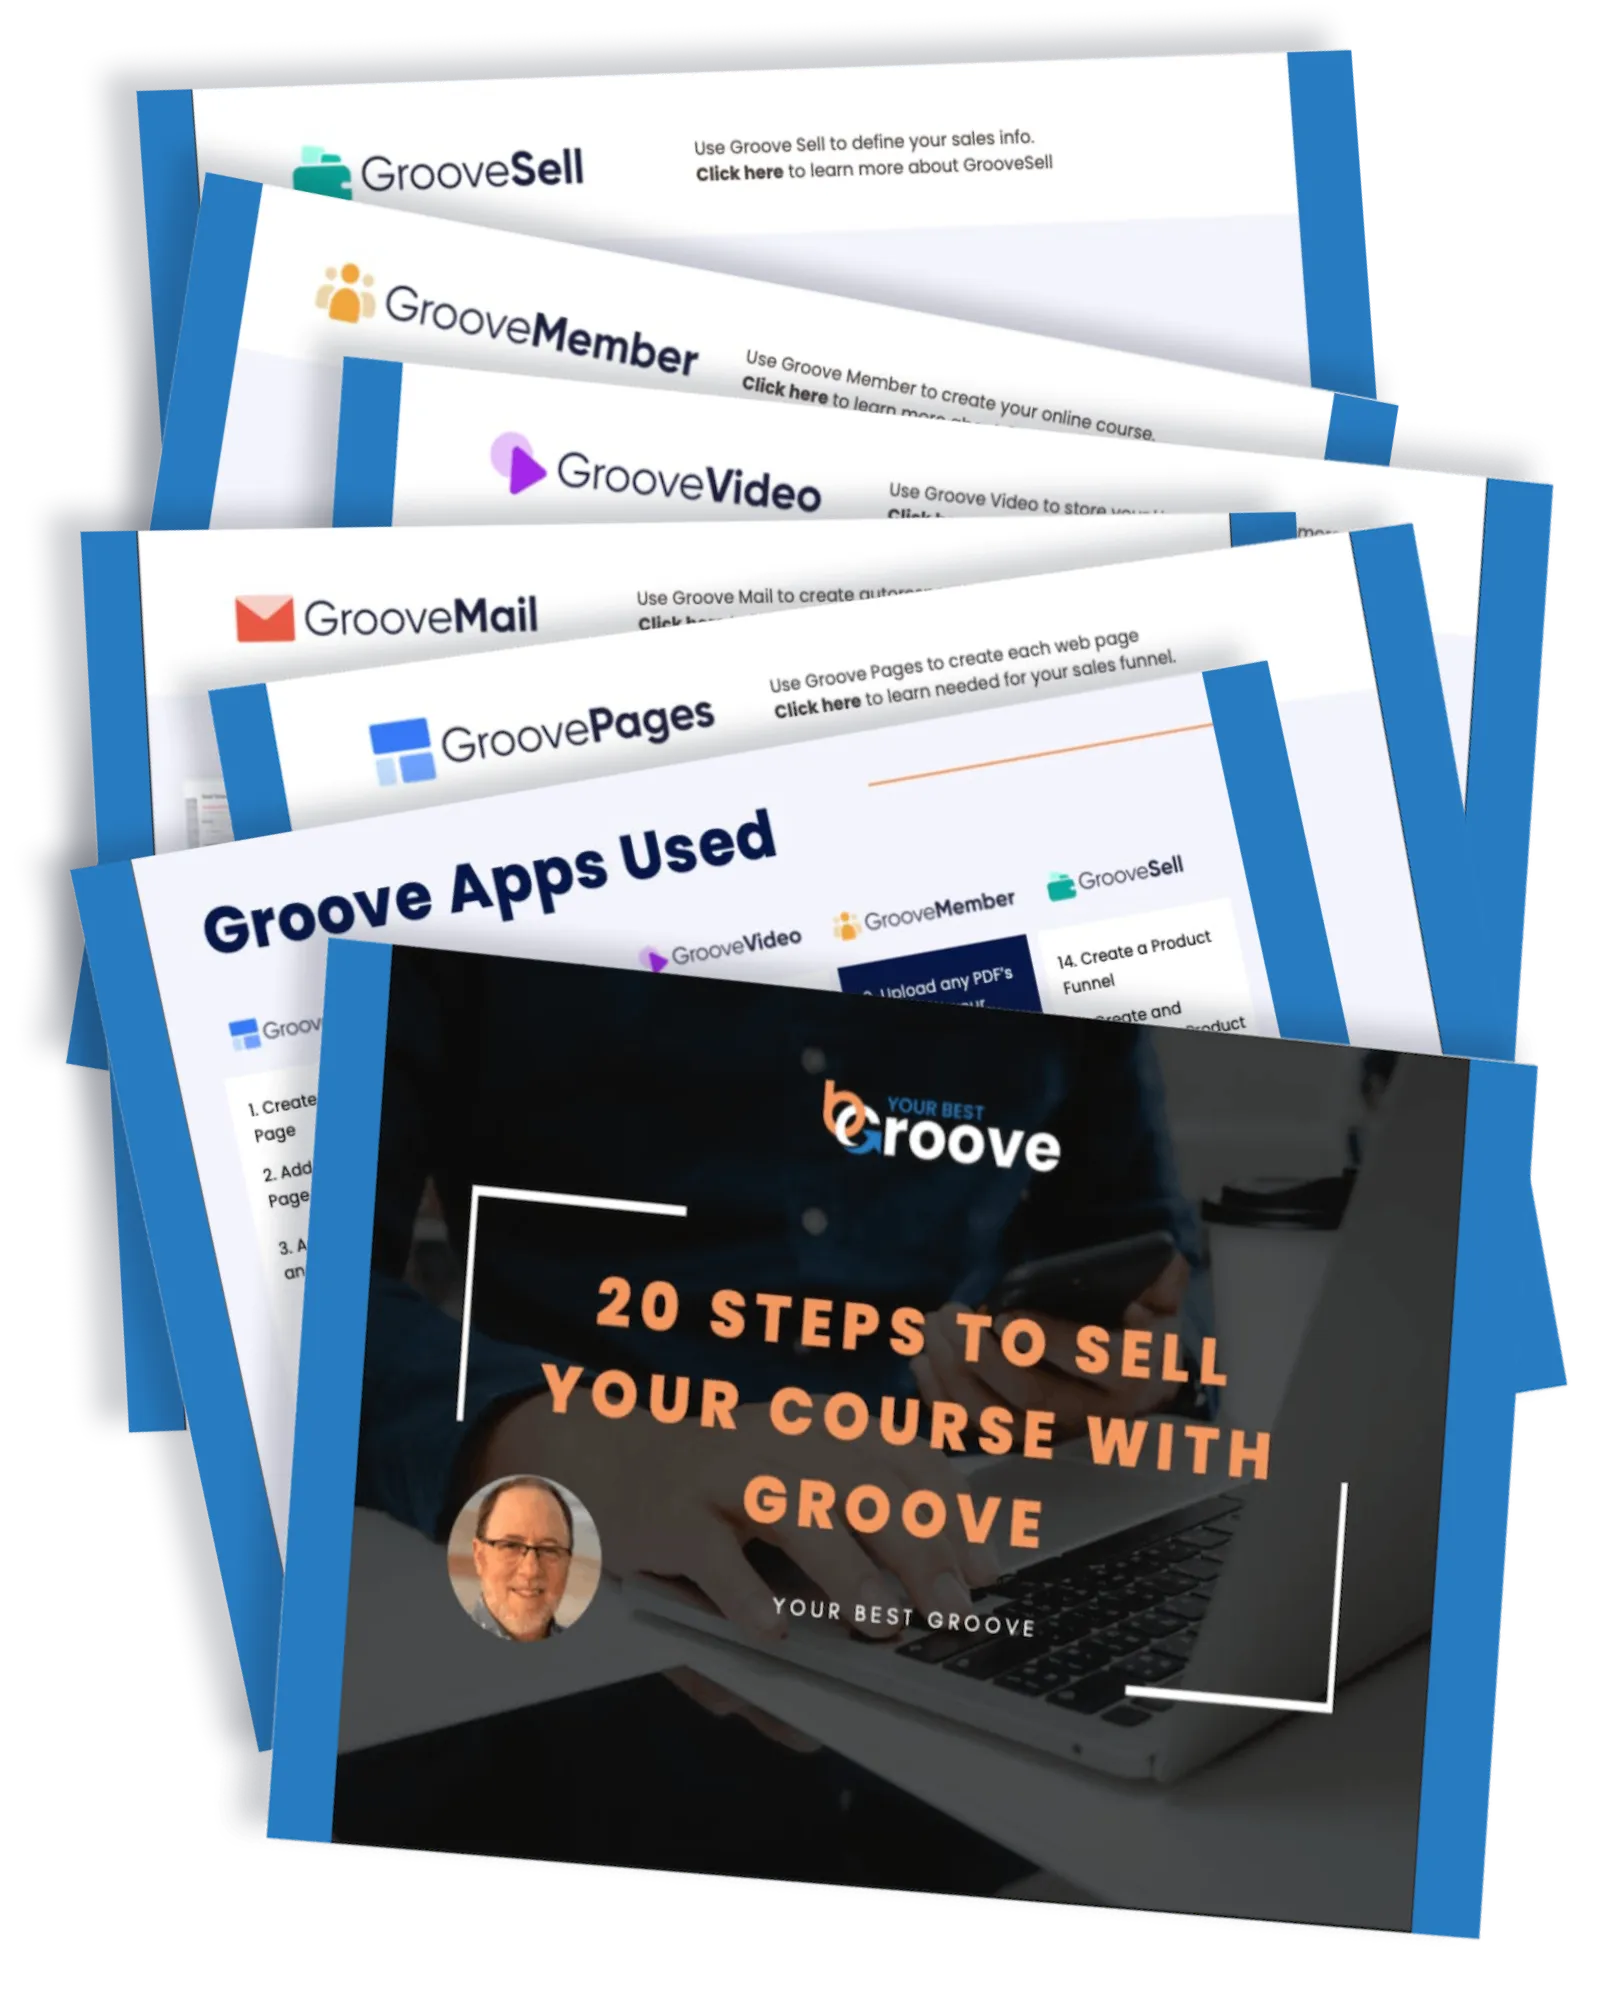 Image of the 20 Step Guide to Sell Your Course with Groove